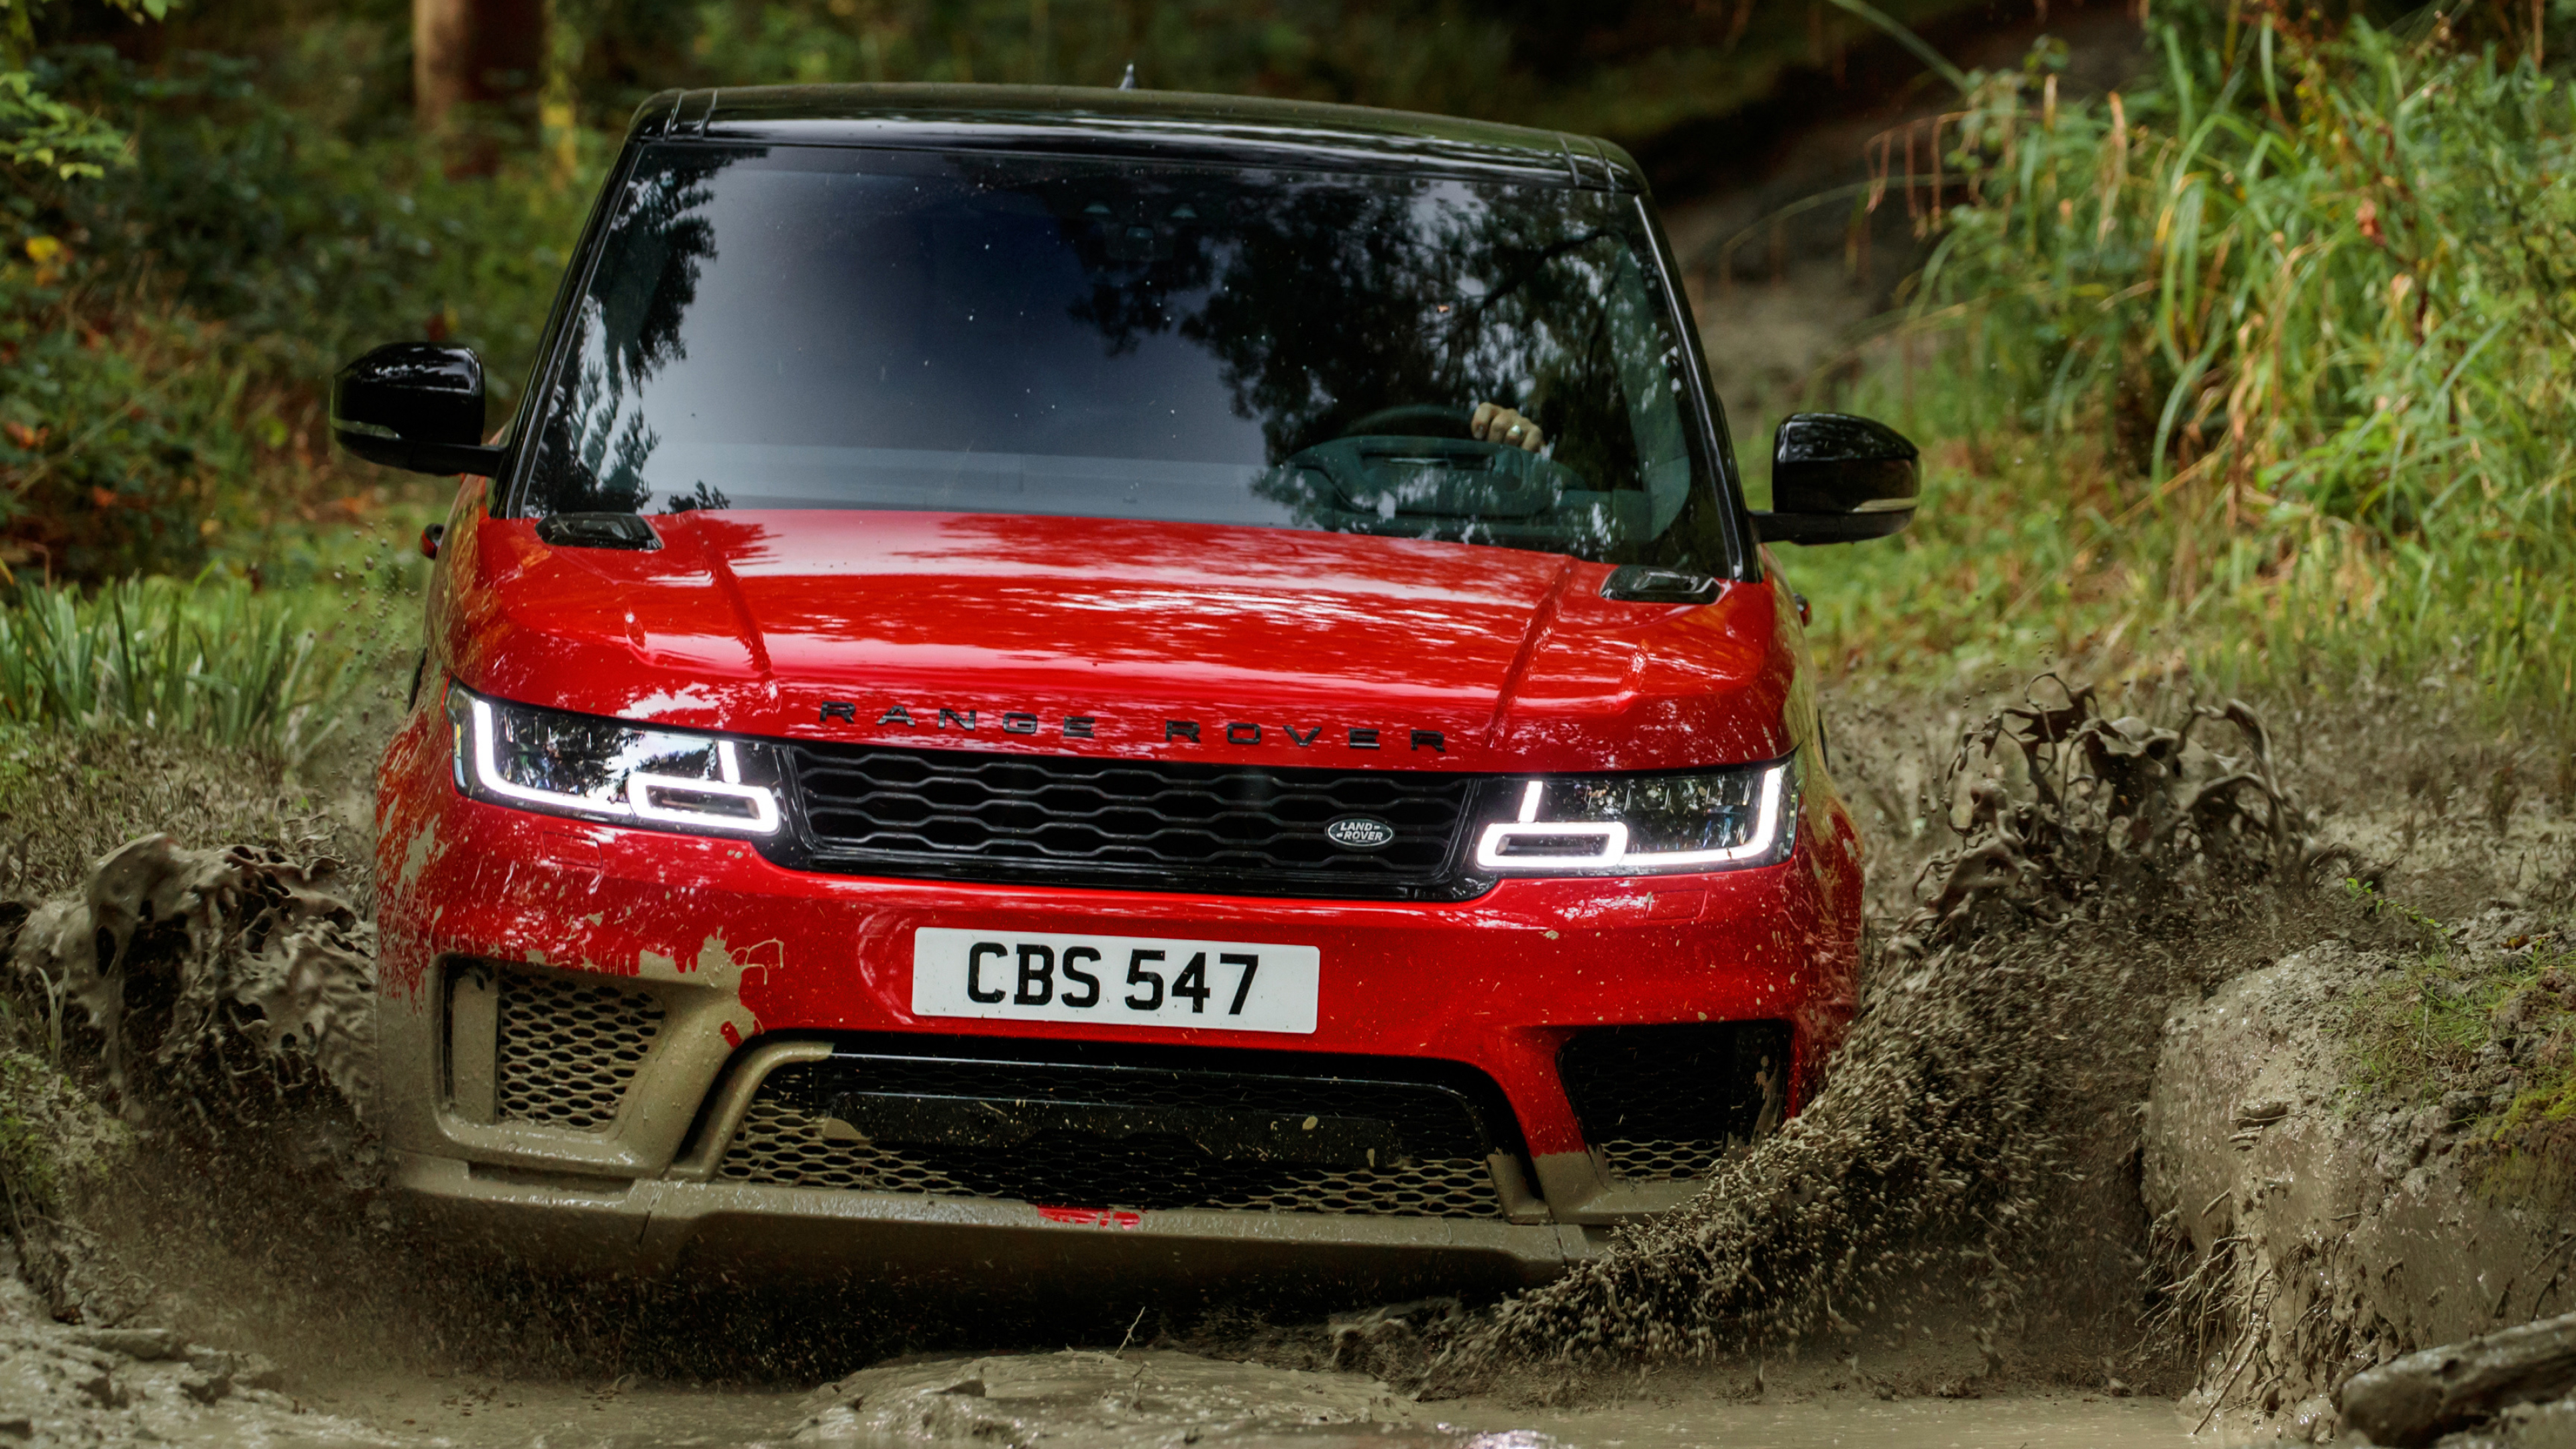 Off-road Driving: Range Rover Sport, SUV, Four-wheel drive, Higher traction vehicles. 3840x2160 4K Background.